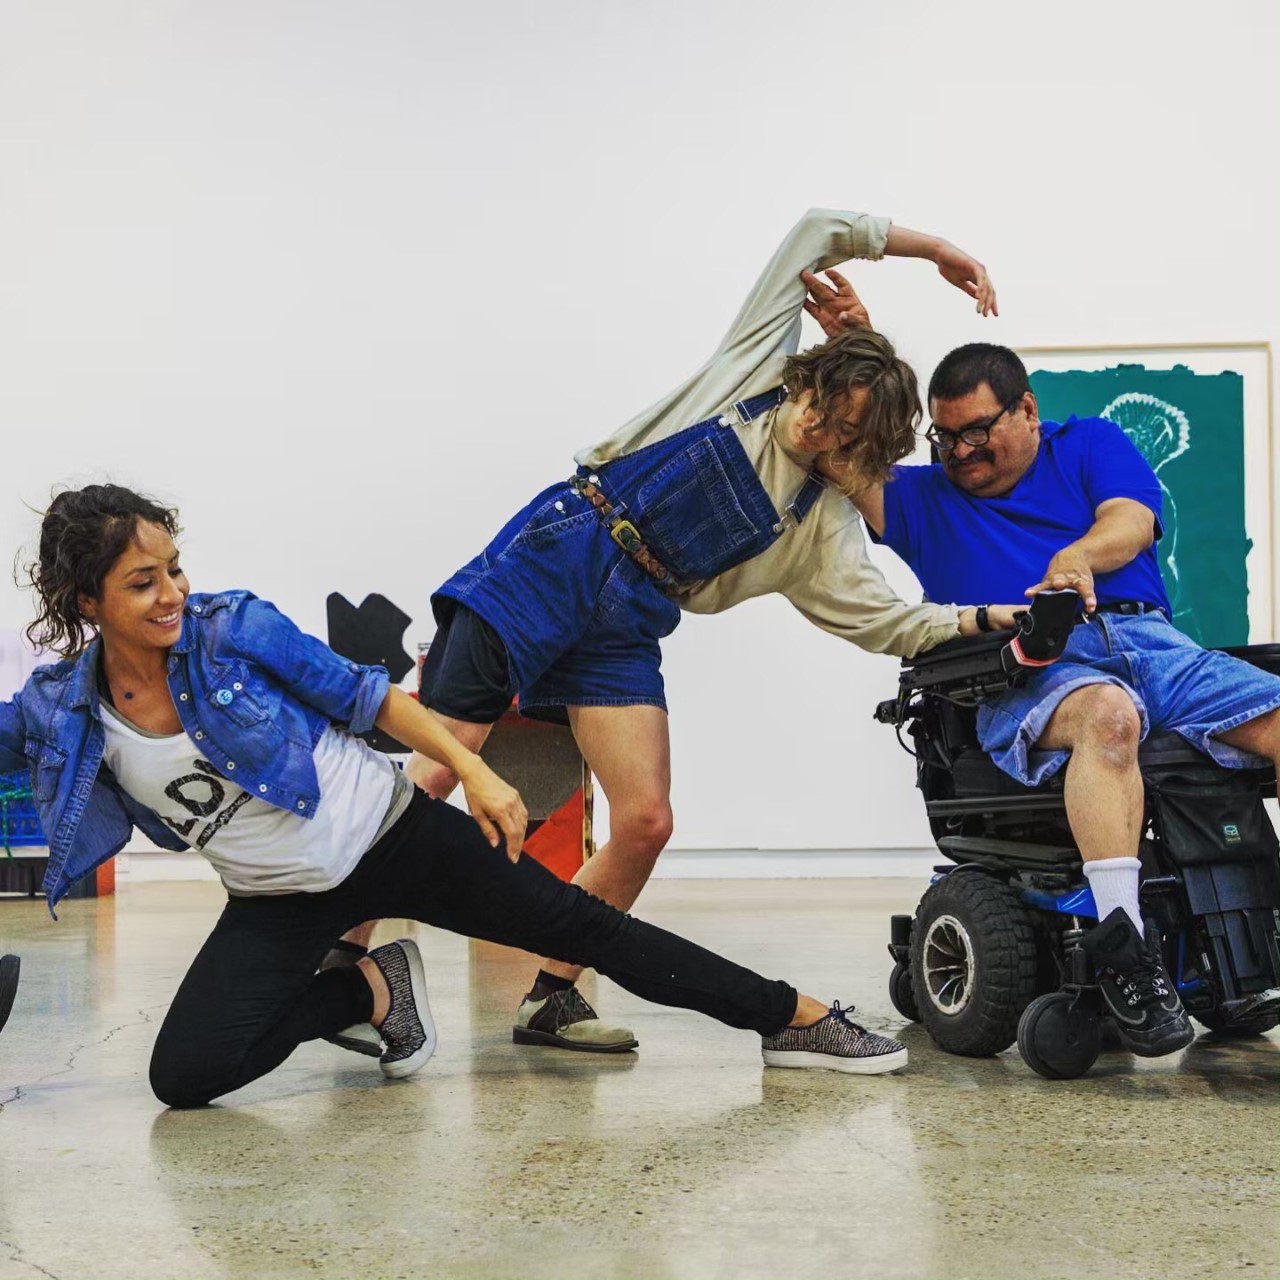 Photo taken in an indoor gallery space shows a man in a power wheelchair dancing with a woman arching her back and arms towards him. A woman in the foreground extends her leg between the two.